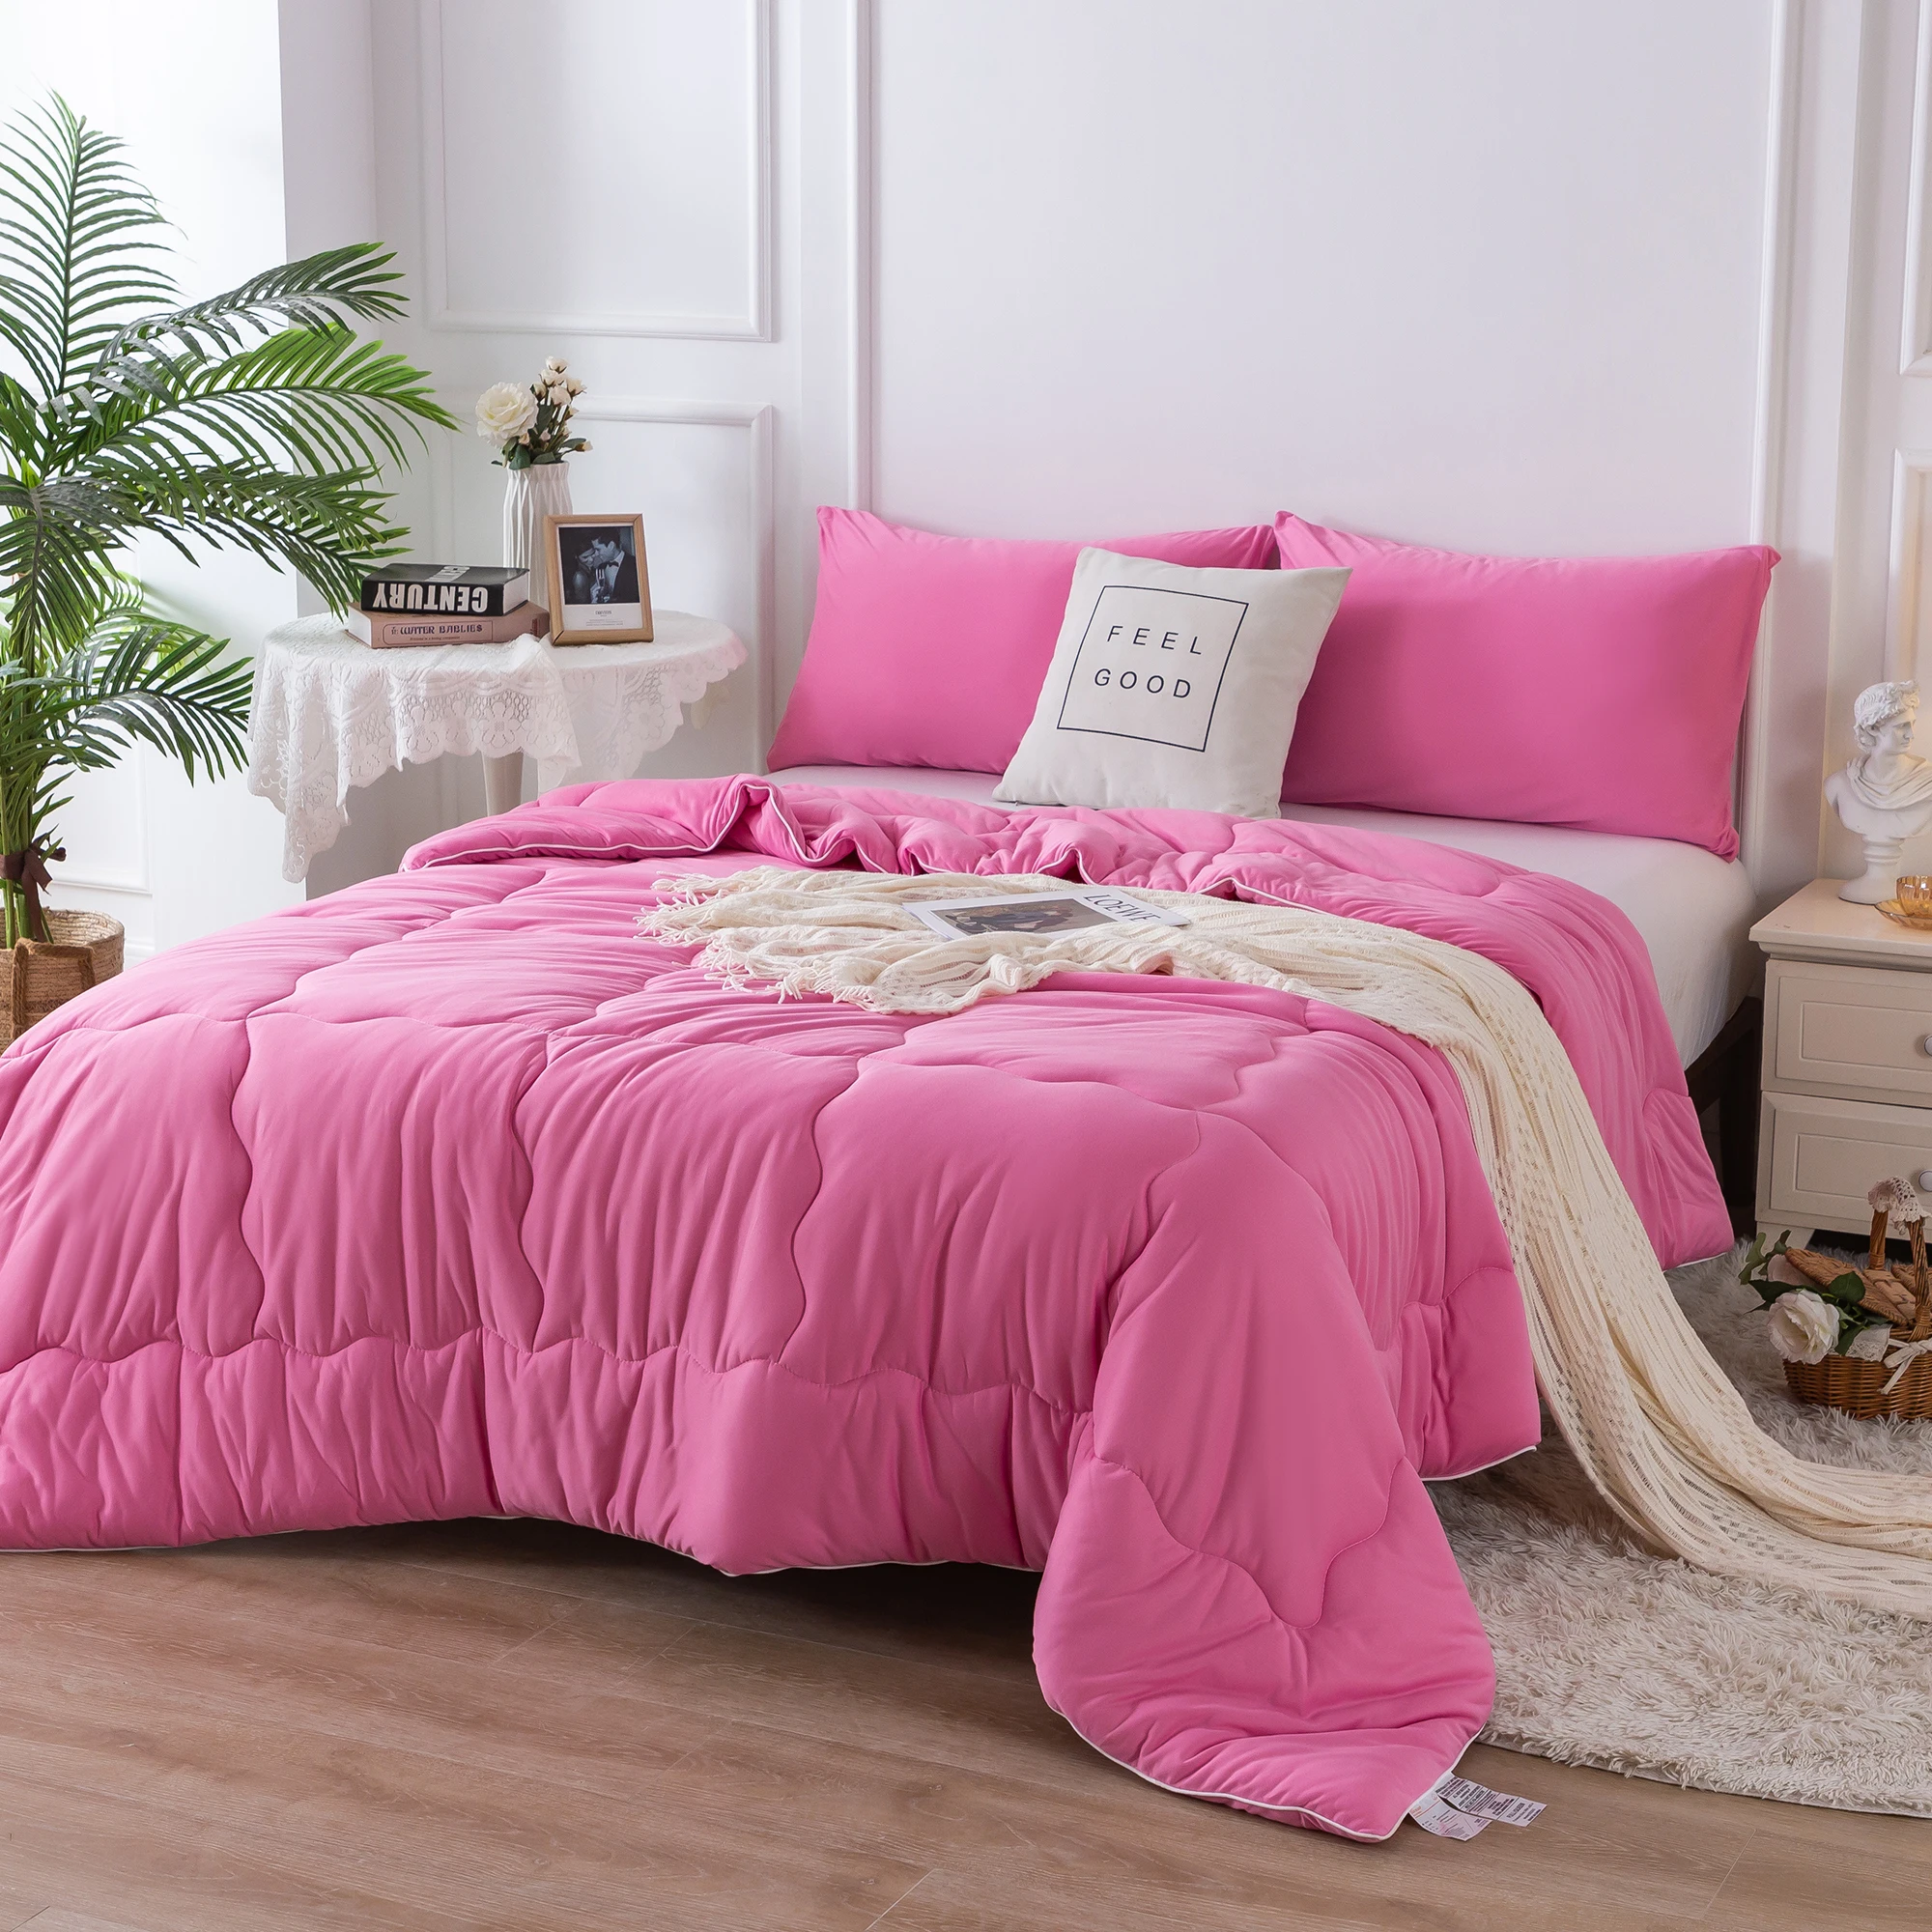 

Jersey Knit Cotton Cozy Breathable Bedding1 Down Alternative with 2 Pillowcase for All Season Use Rose pink Twin XL Size